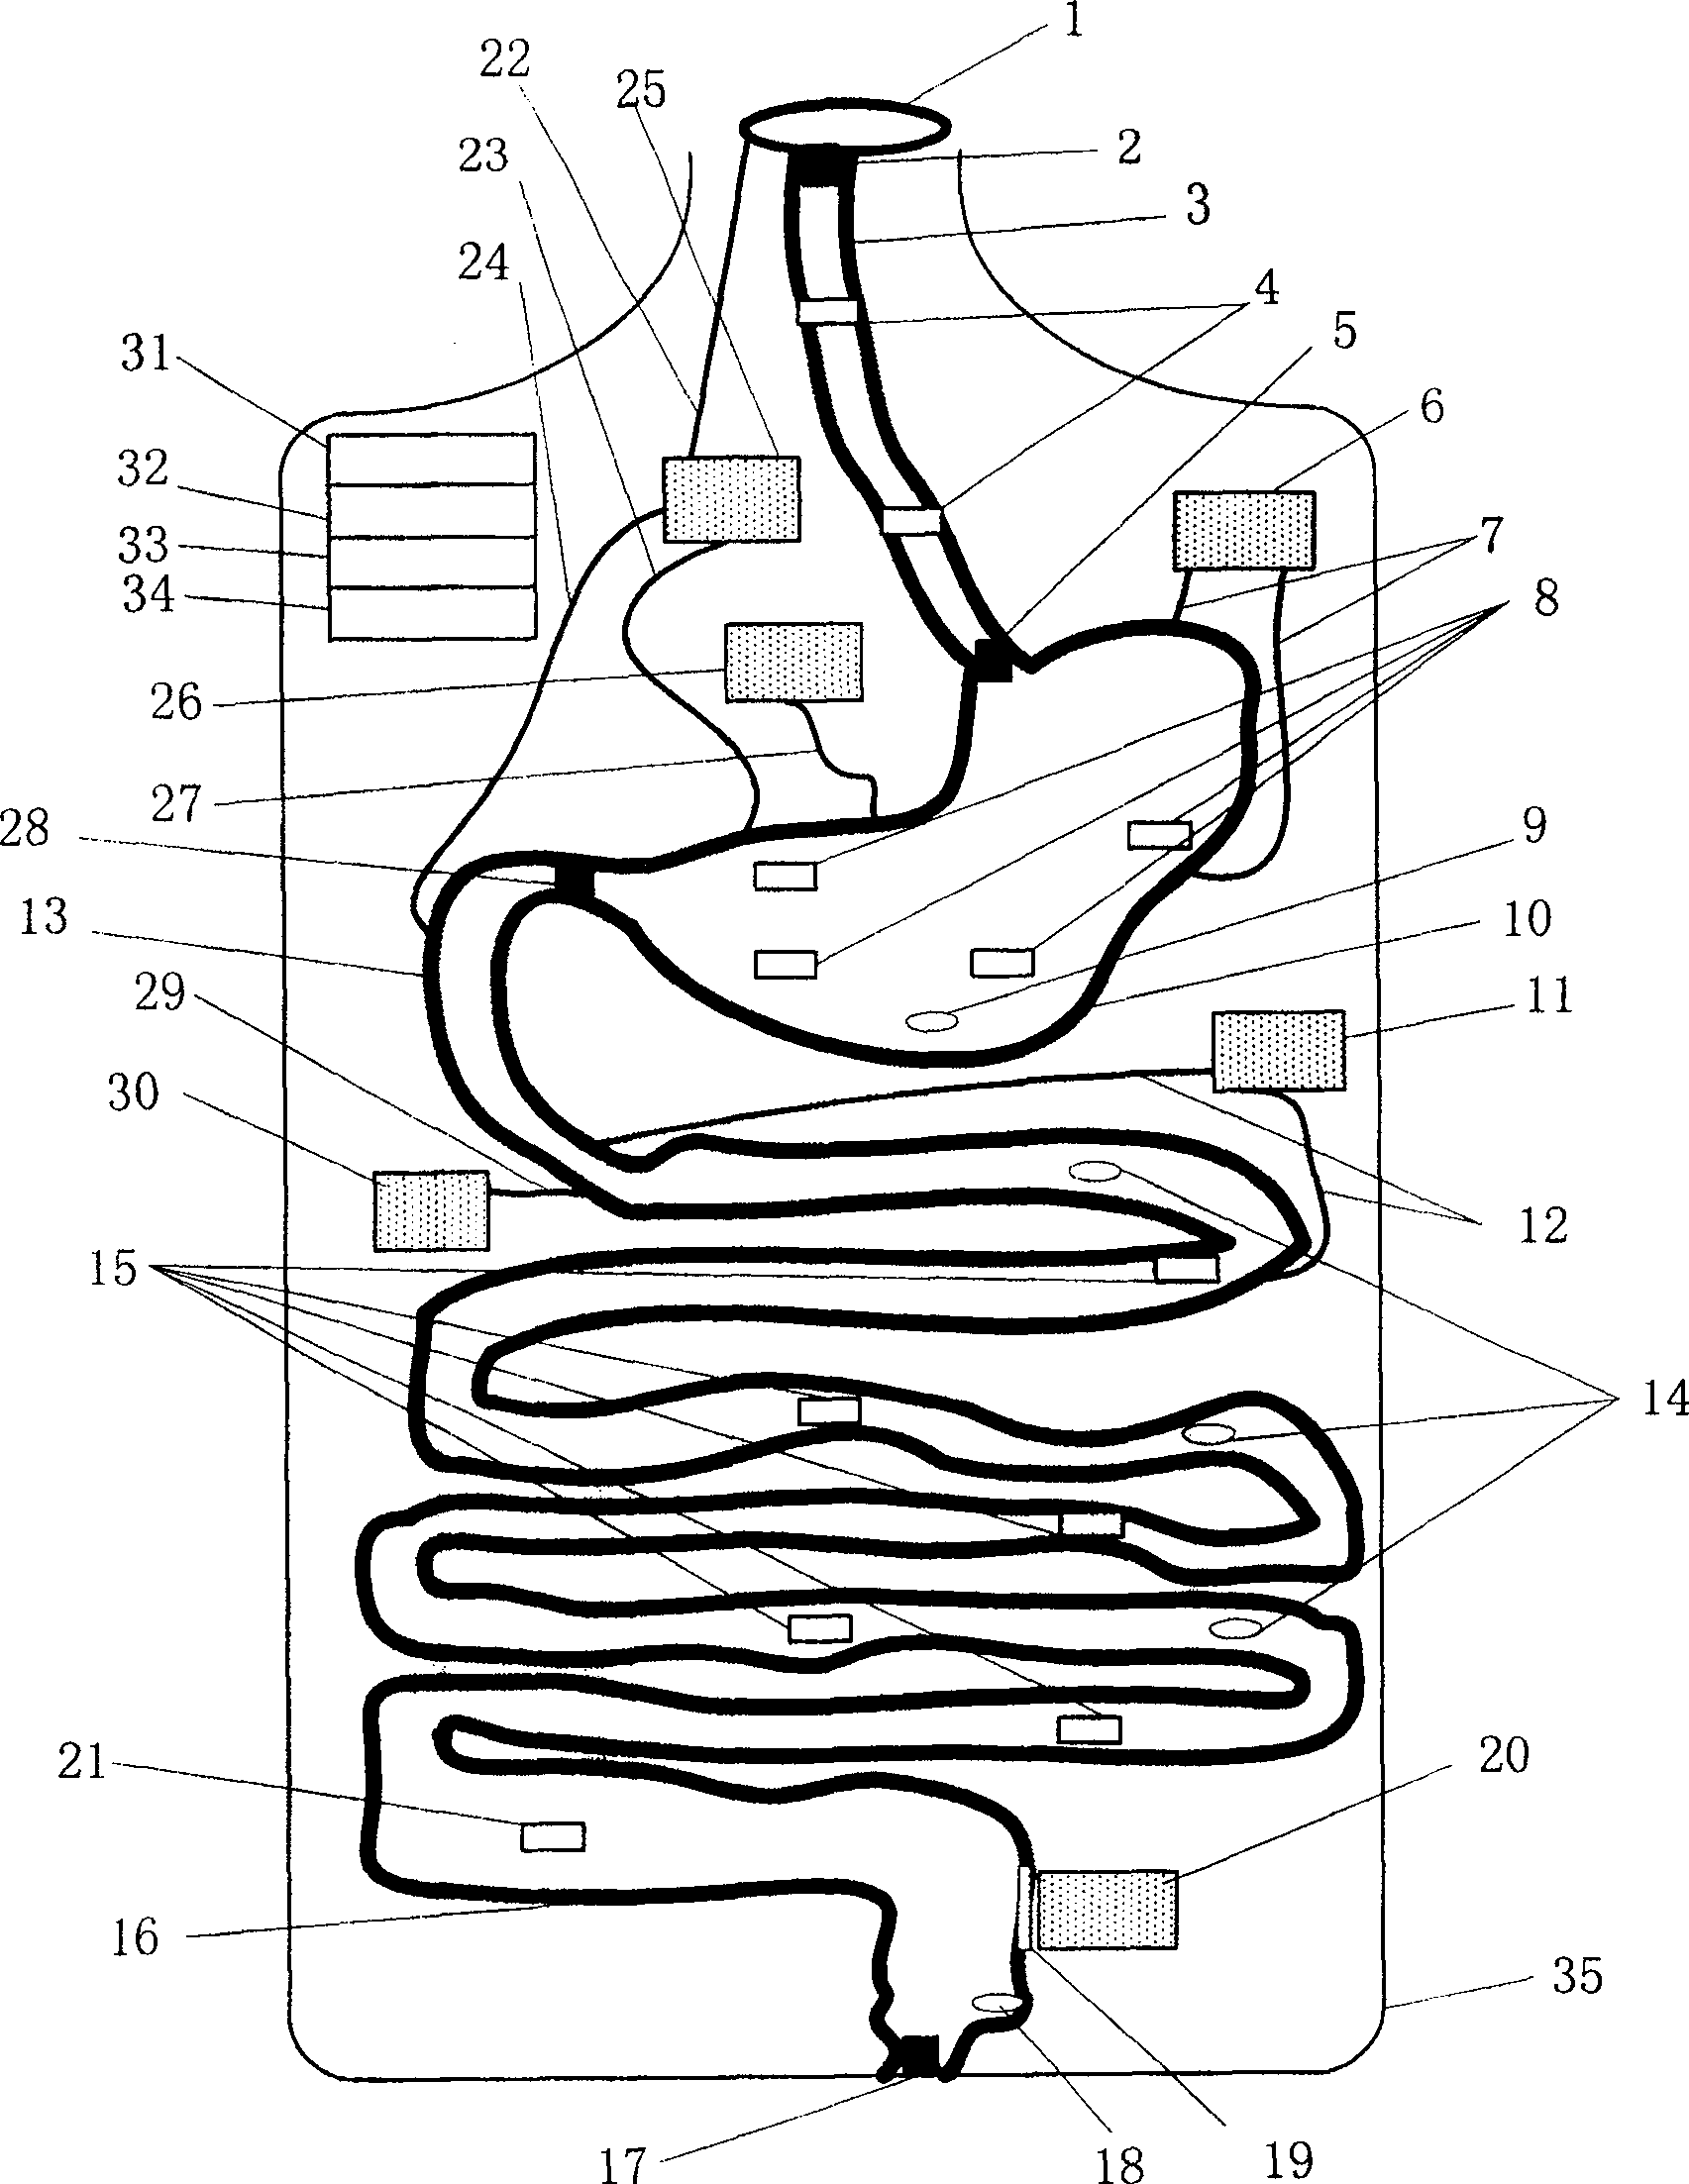 Analog device of alimentary system